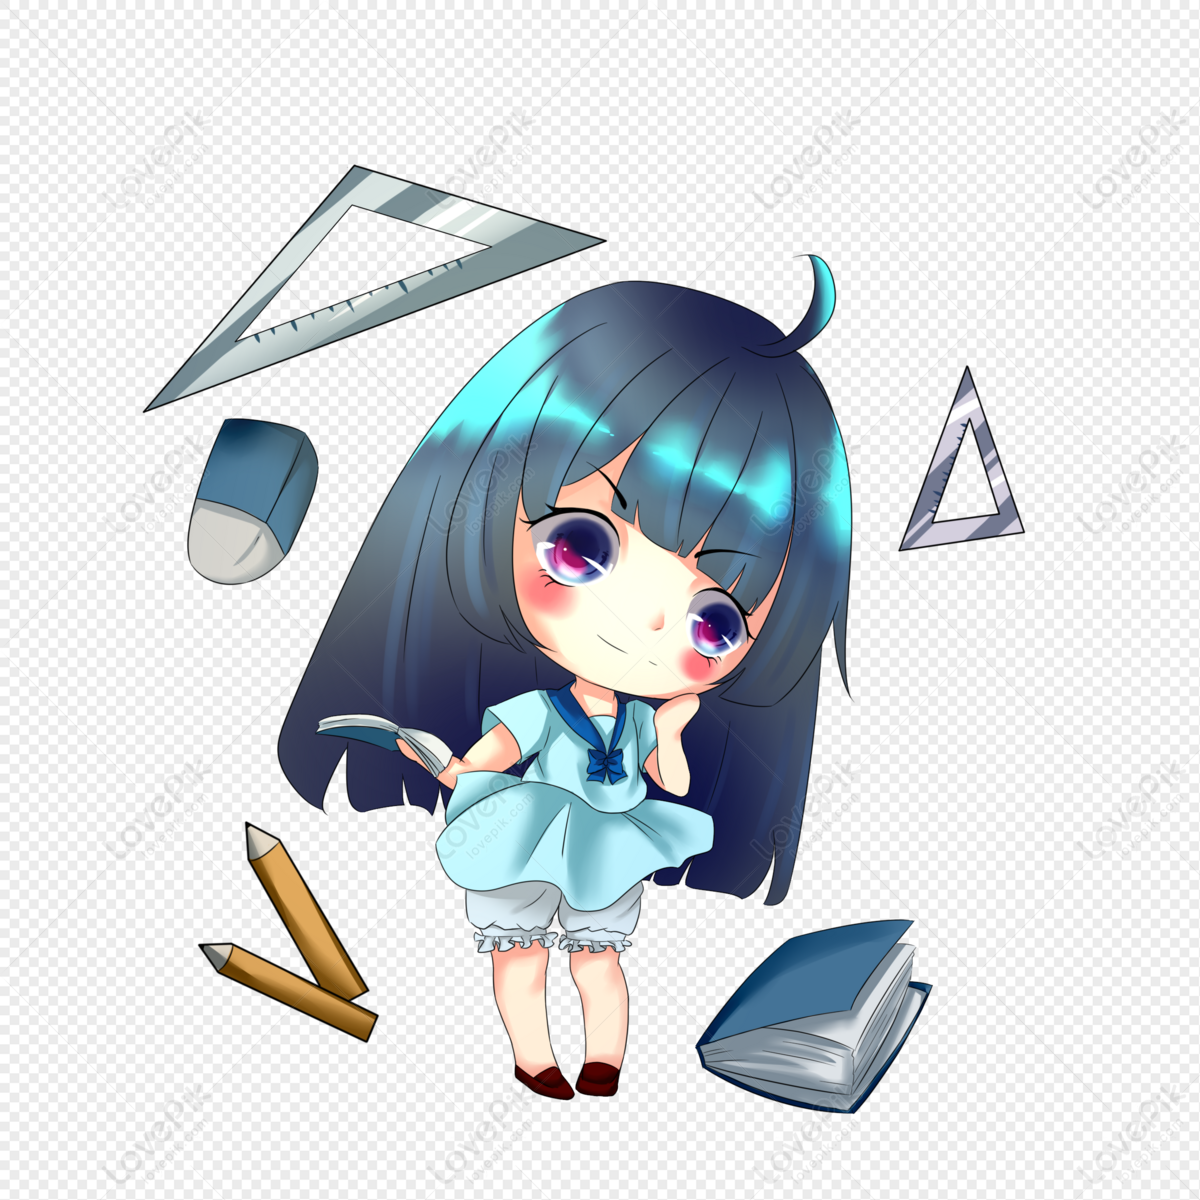 Cute School Anime Chibi Character, Anime, Chibi, School PNG Transparent  Clipart Image and PSD File for Free Download